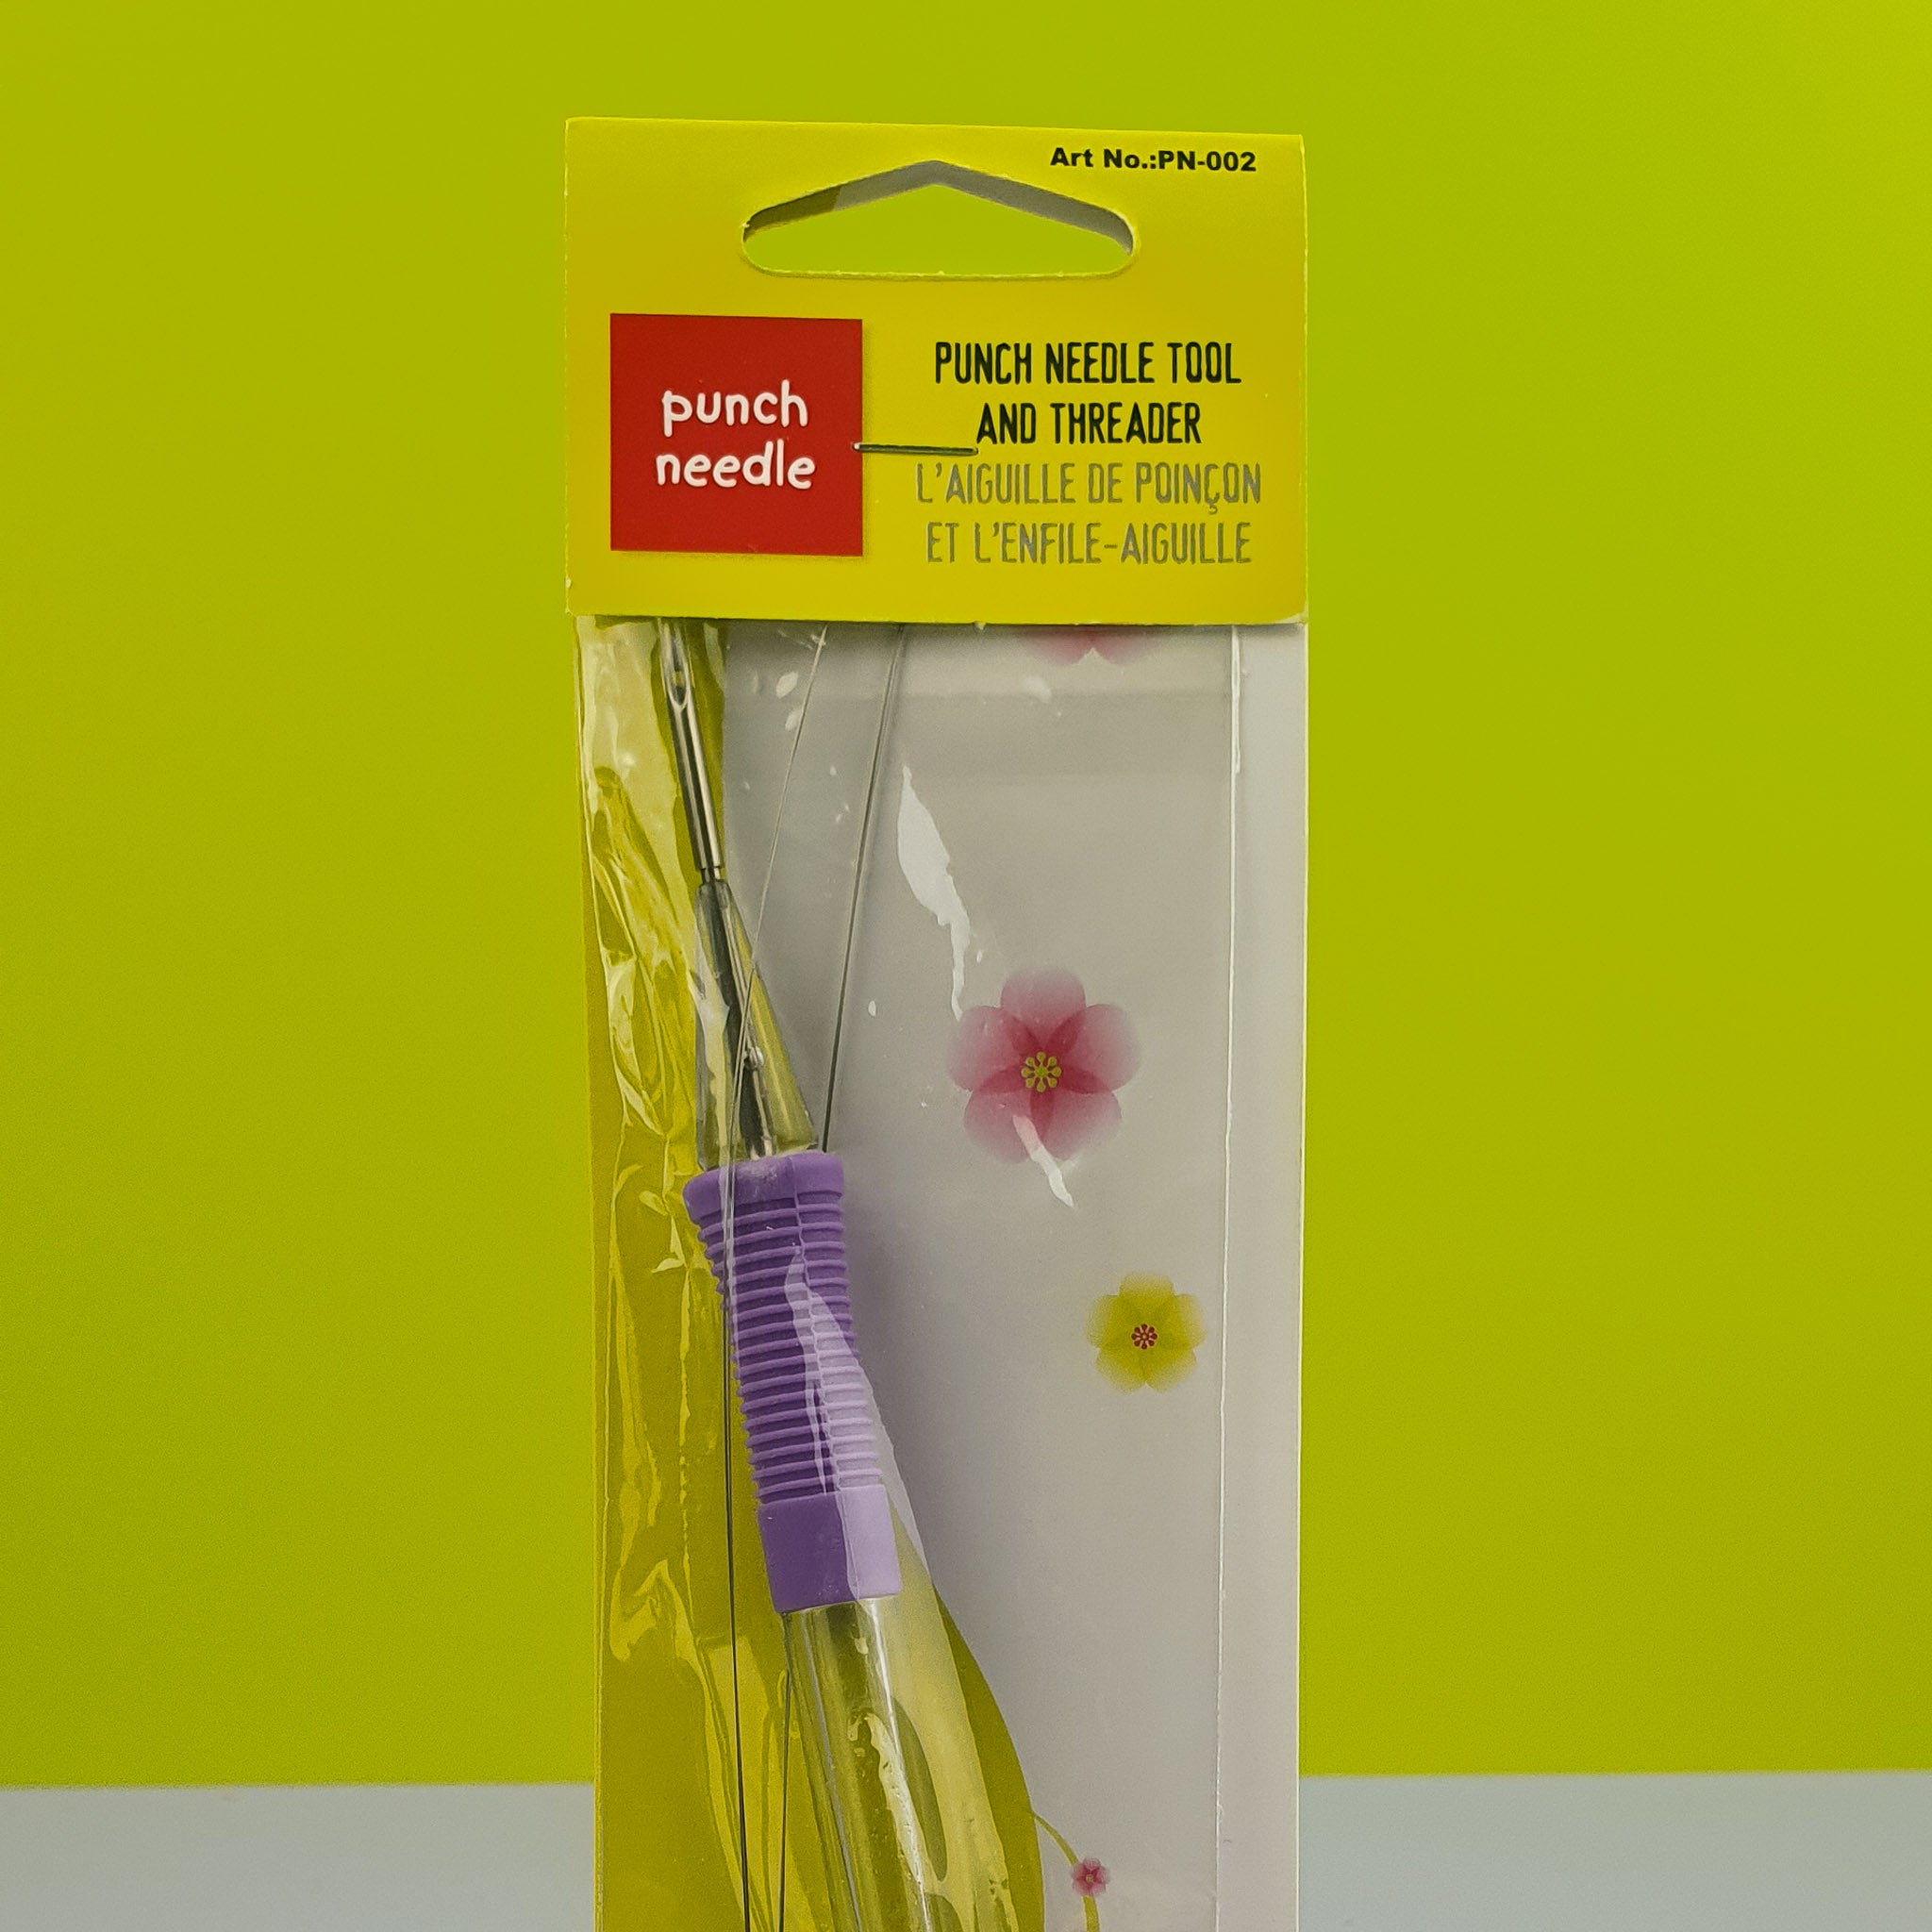 Embroidery Punch Needle in packaging